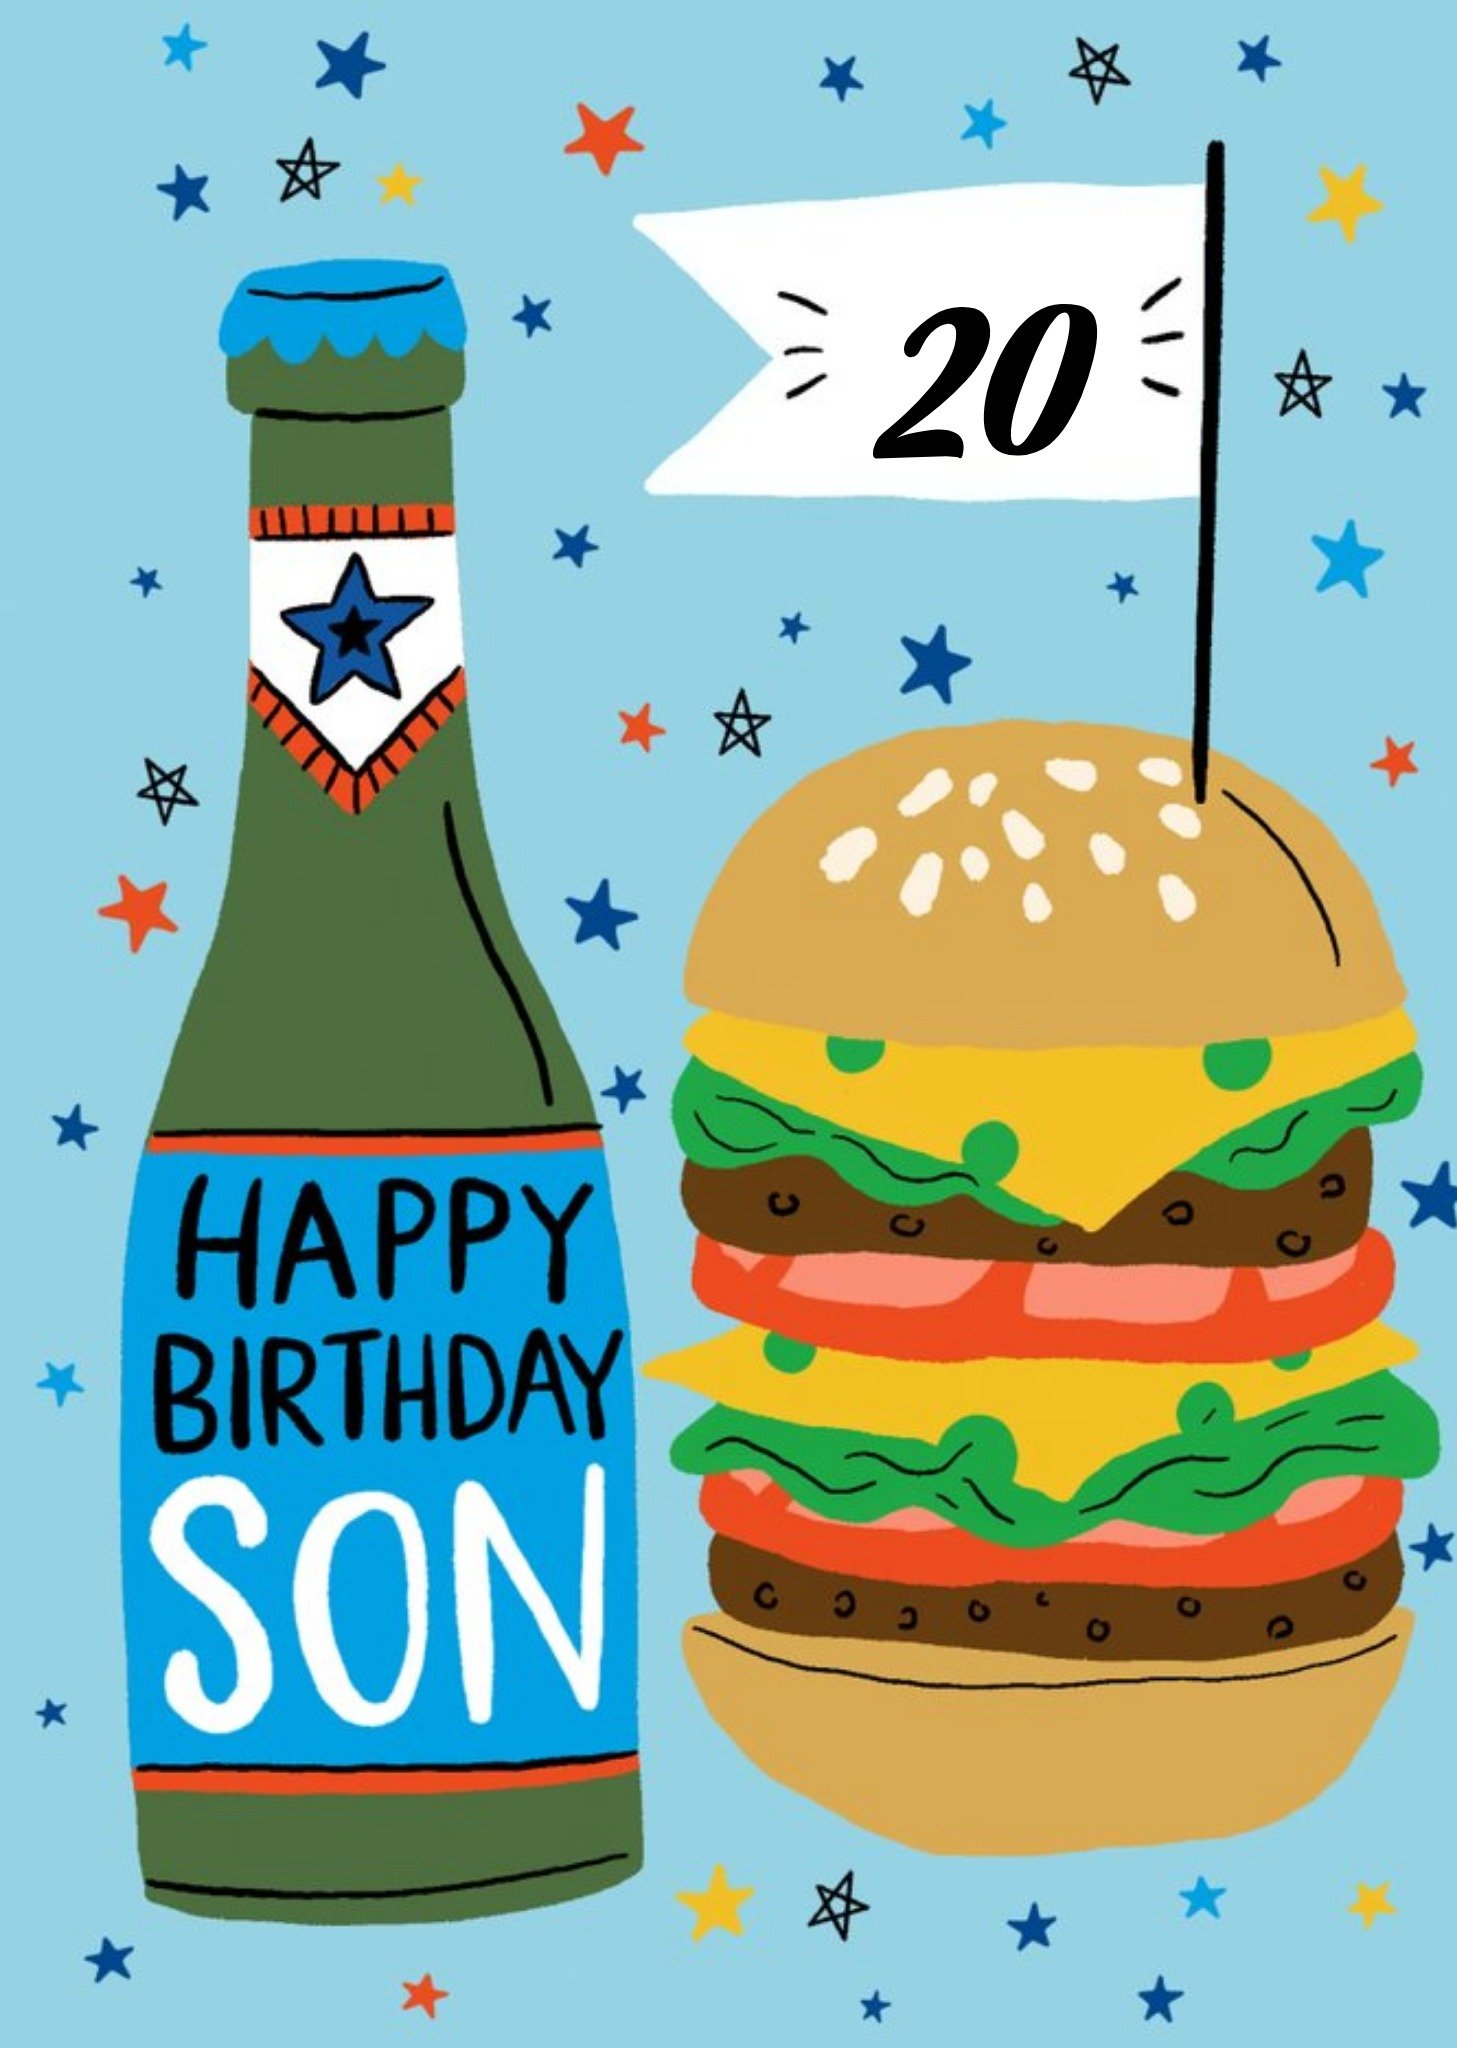 Moonpig Happy Birthday 20th Son Illustrated Beer Bottle And Burger Birthday Card, Large